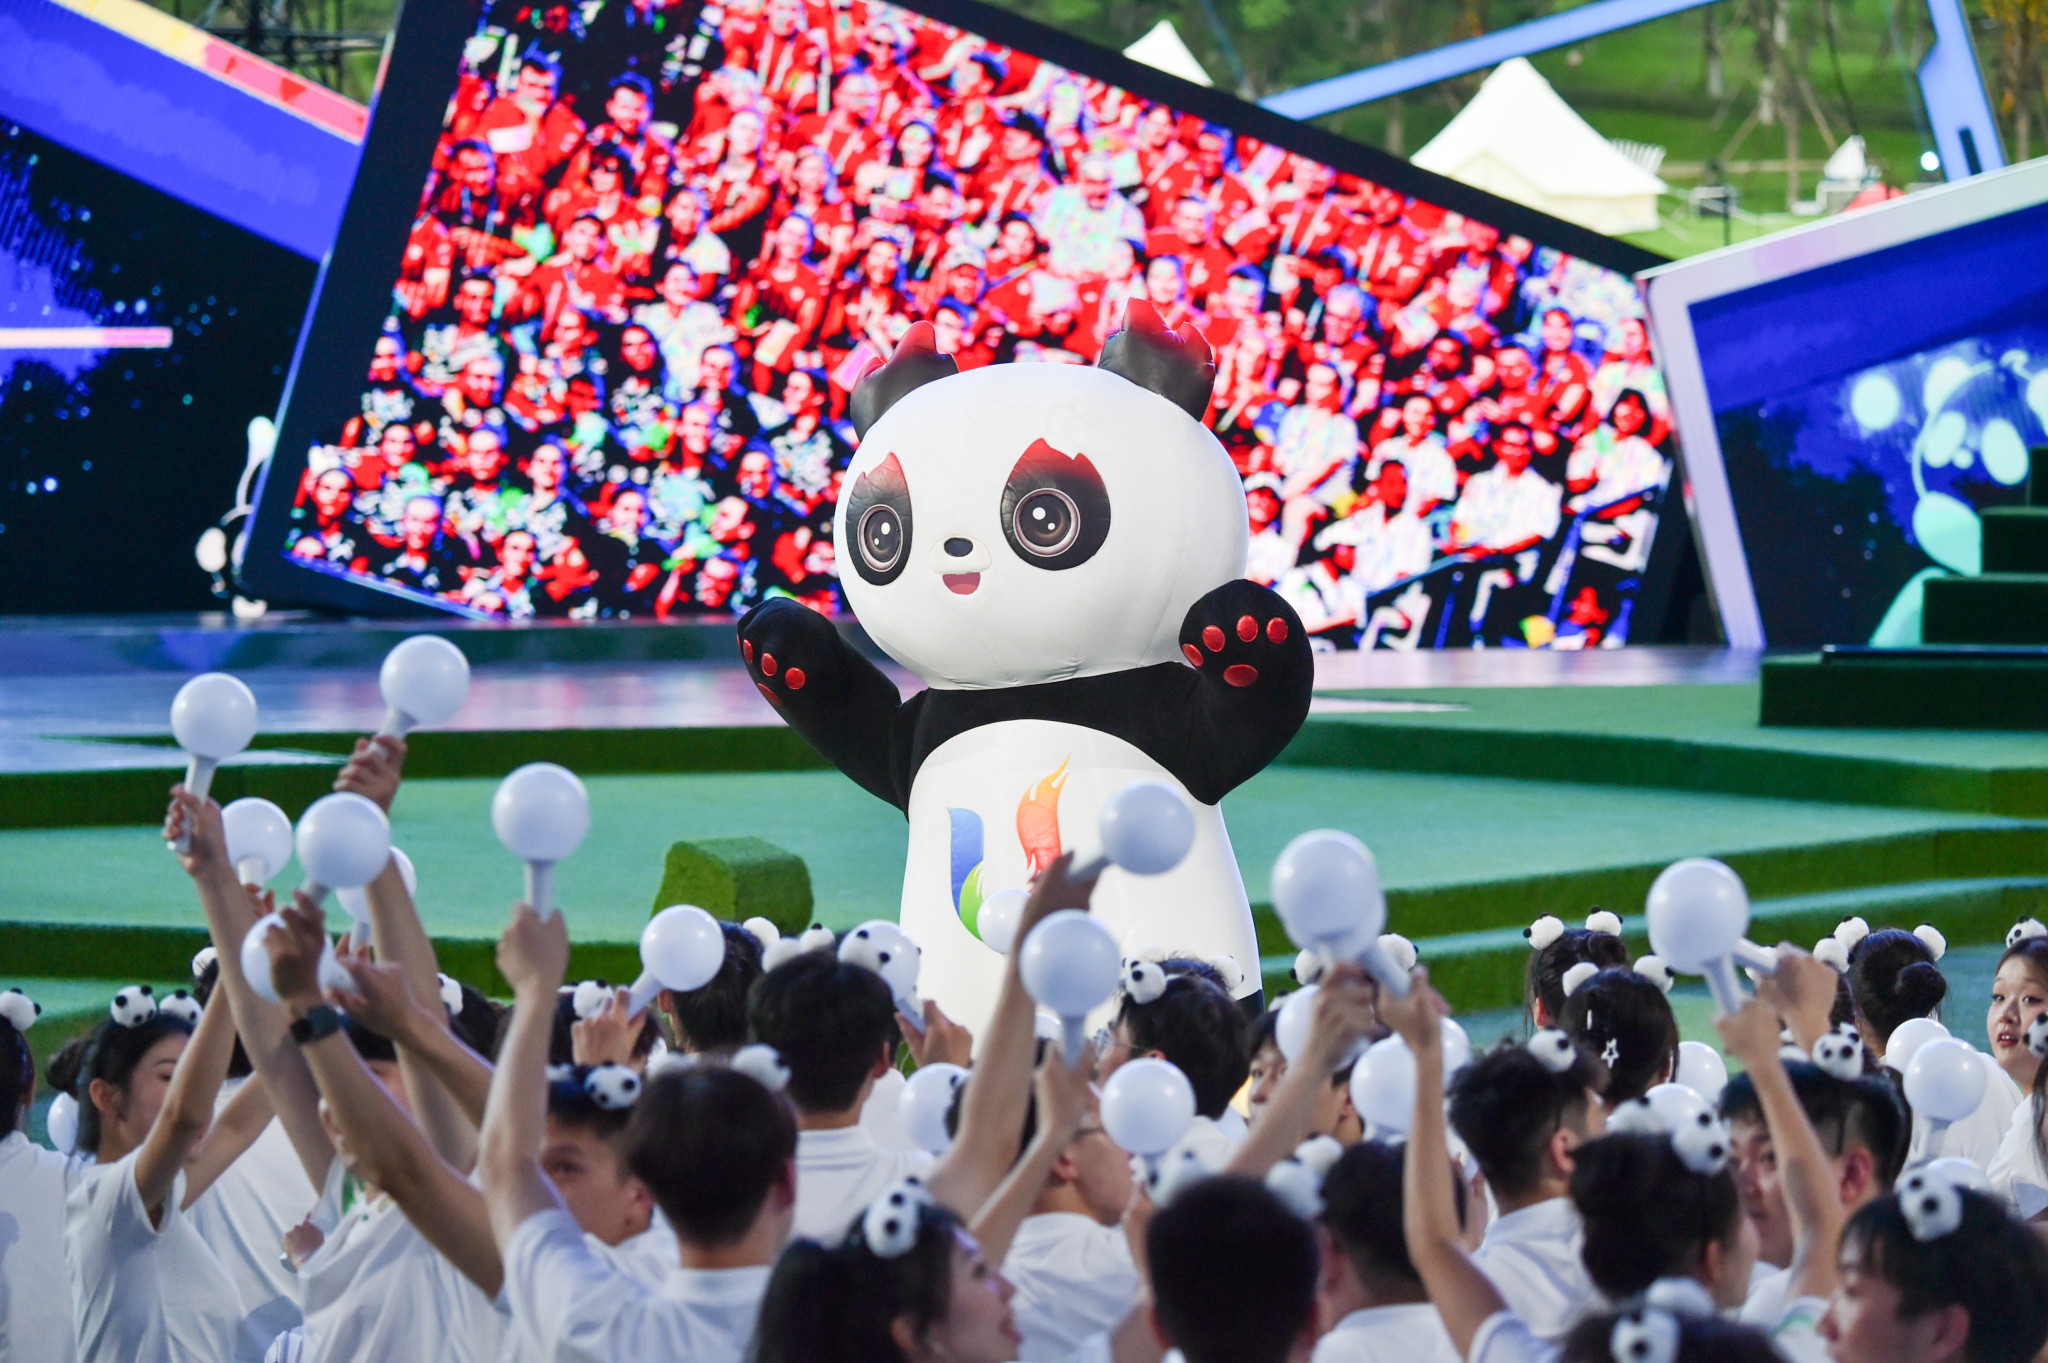 Chengdu is preparing to stage the World Games in two years' time after playing host to this year's FISU Summer World University Games ©Chengdu 2021